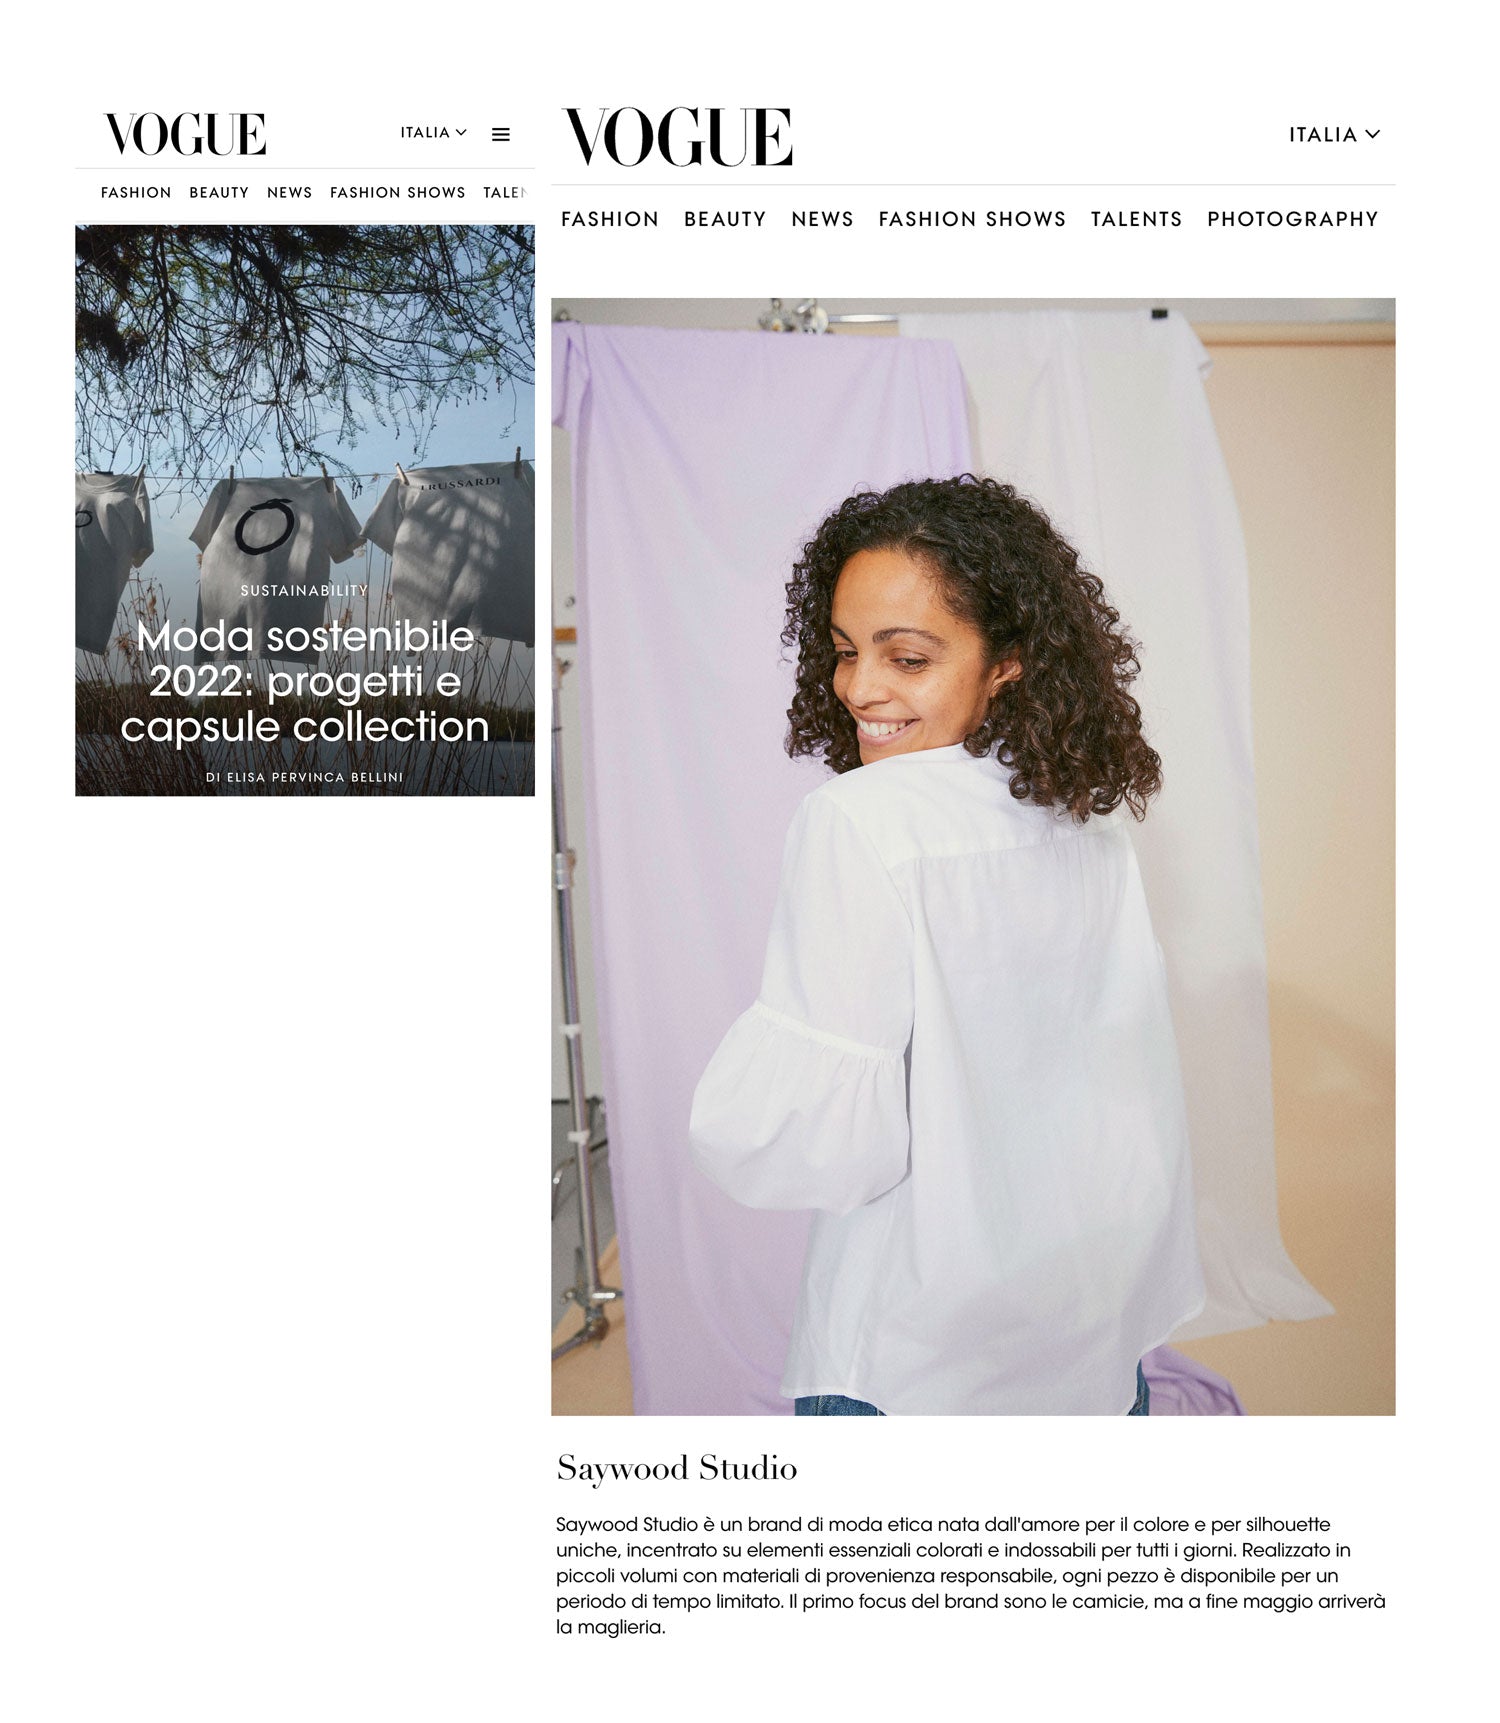 Image shows Saywood's Edi Volume Sleeve Shirt, white, in Vogue Italia's feature on Sustainable Fashion 2022